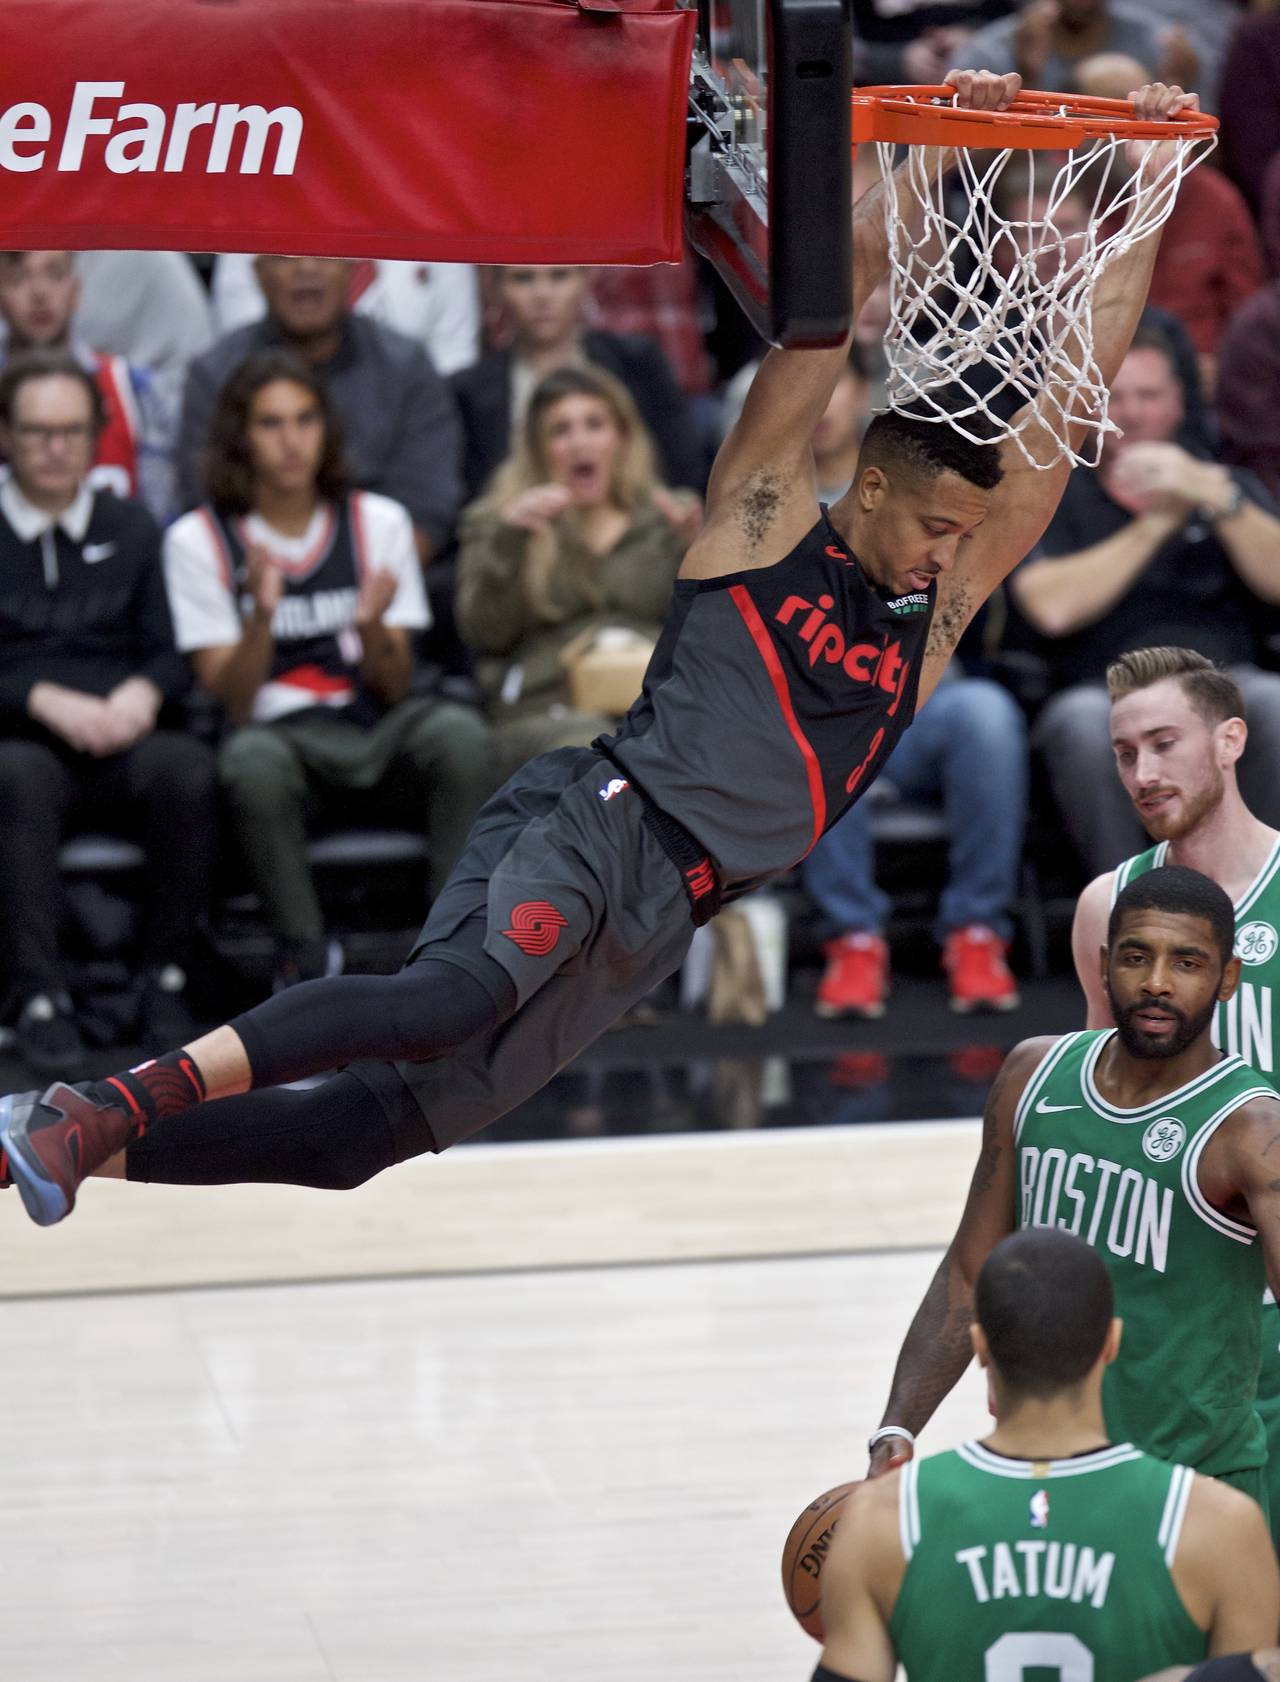 Blazers win fourth straight with 100-94 victory over Boston1280 x 1682